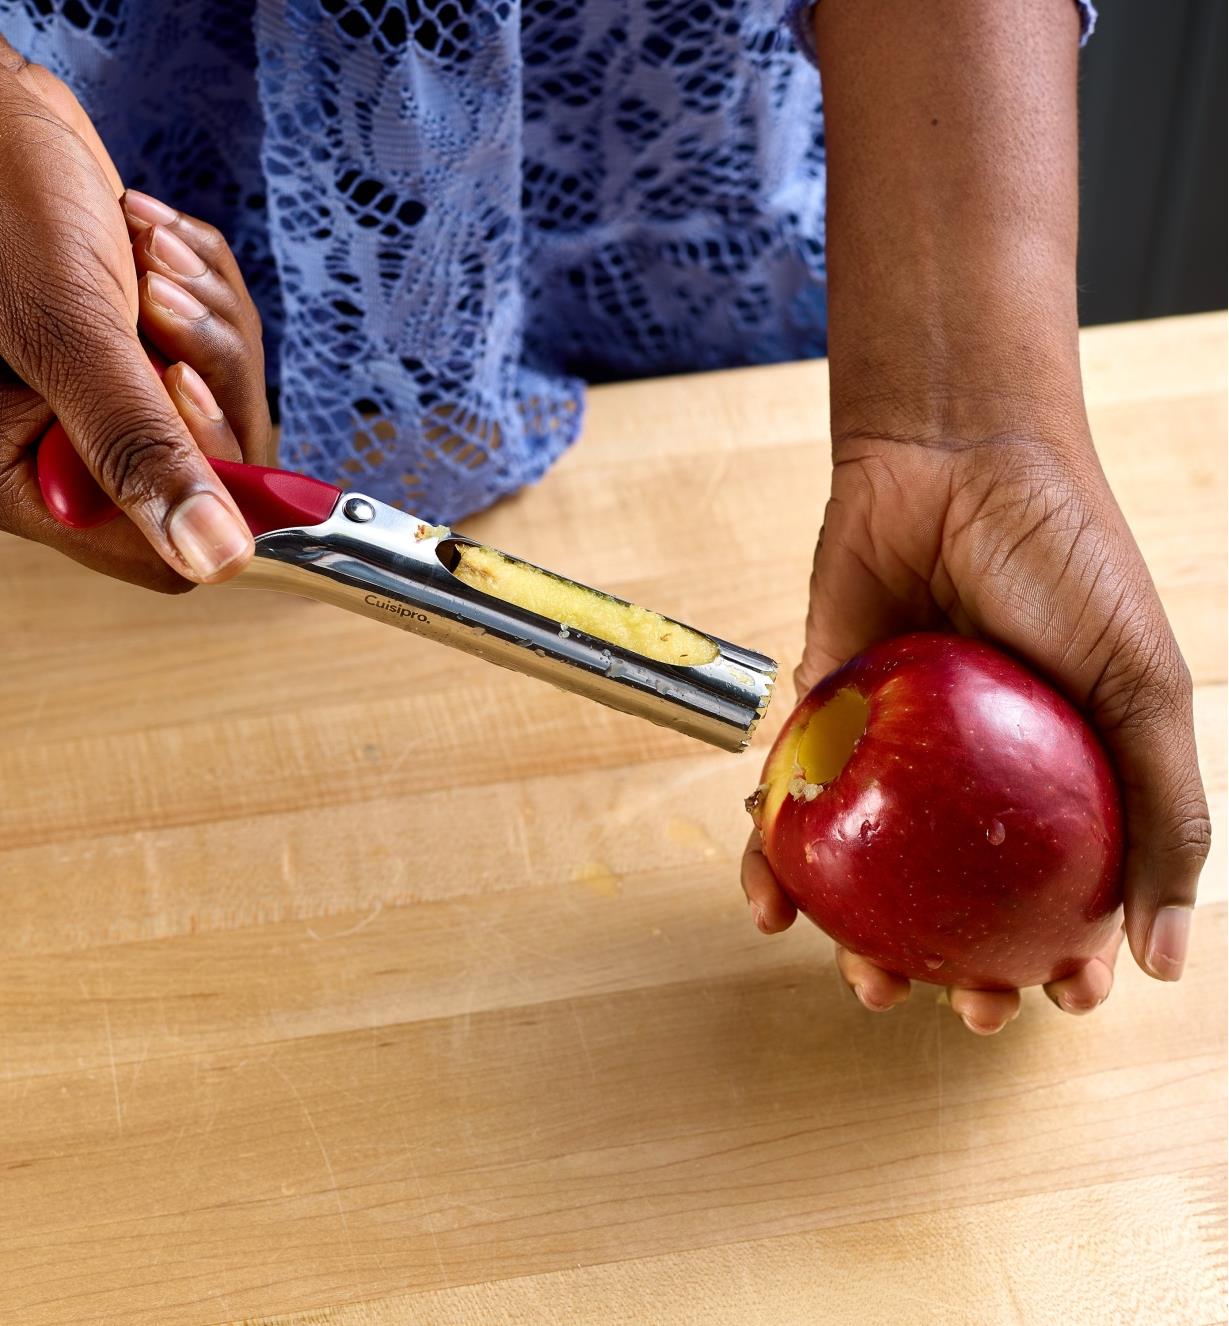 Removing the core from an apple using the apple corer